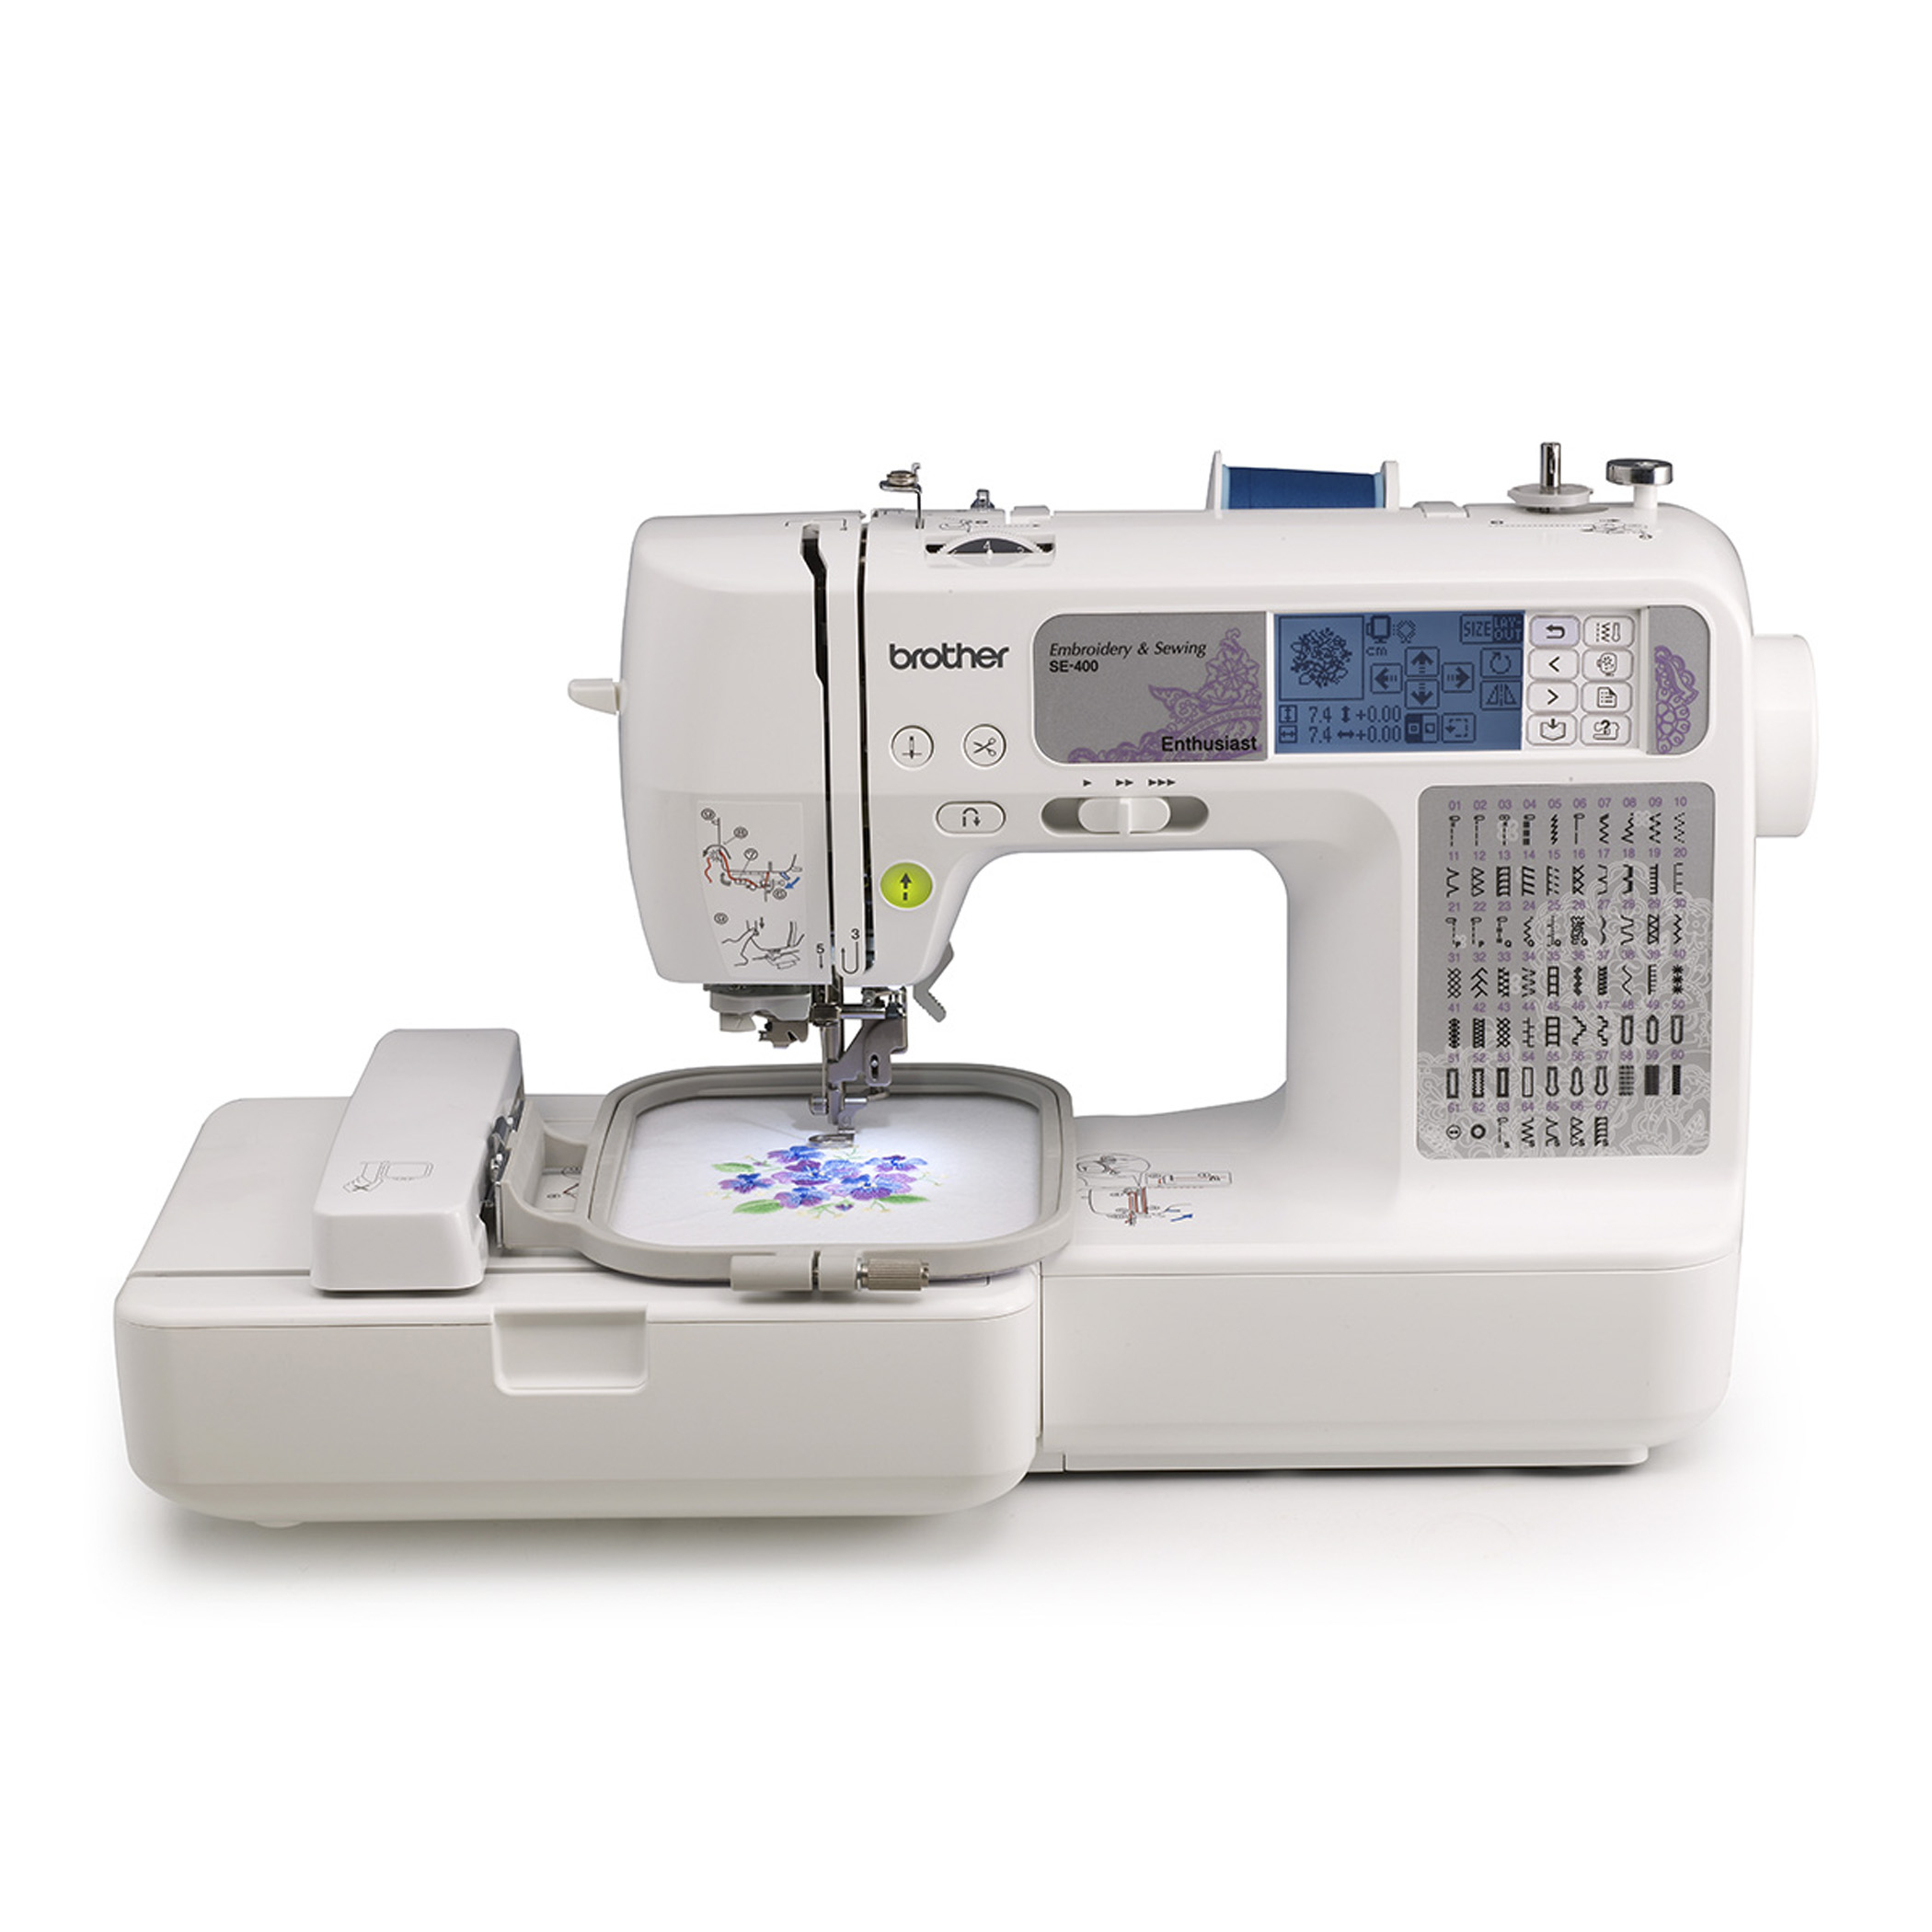 Brother Sewing Machine Embroidery Patterns Brother Se 400 Computerized Sewing Embroidery Machine